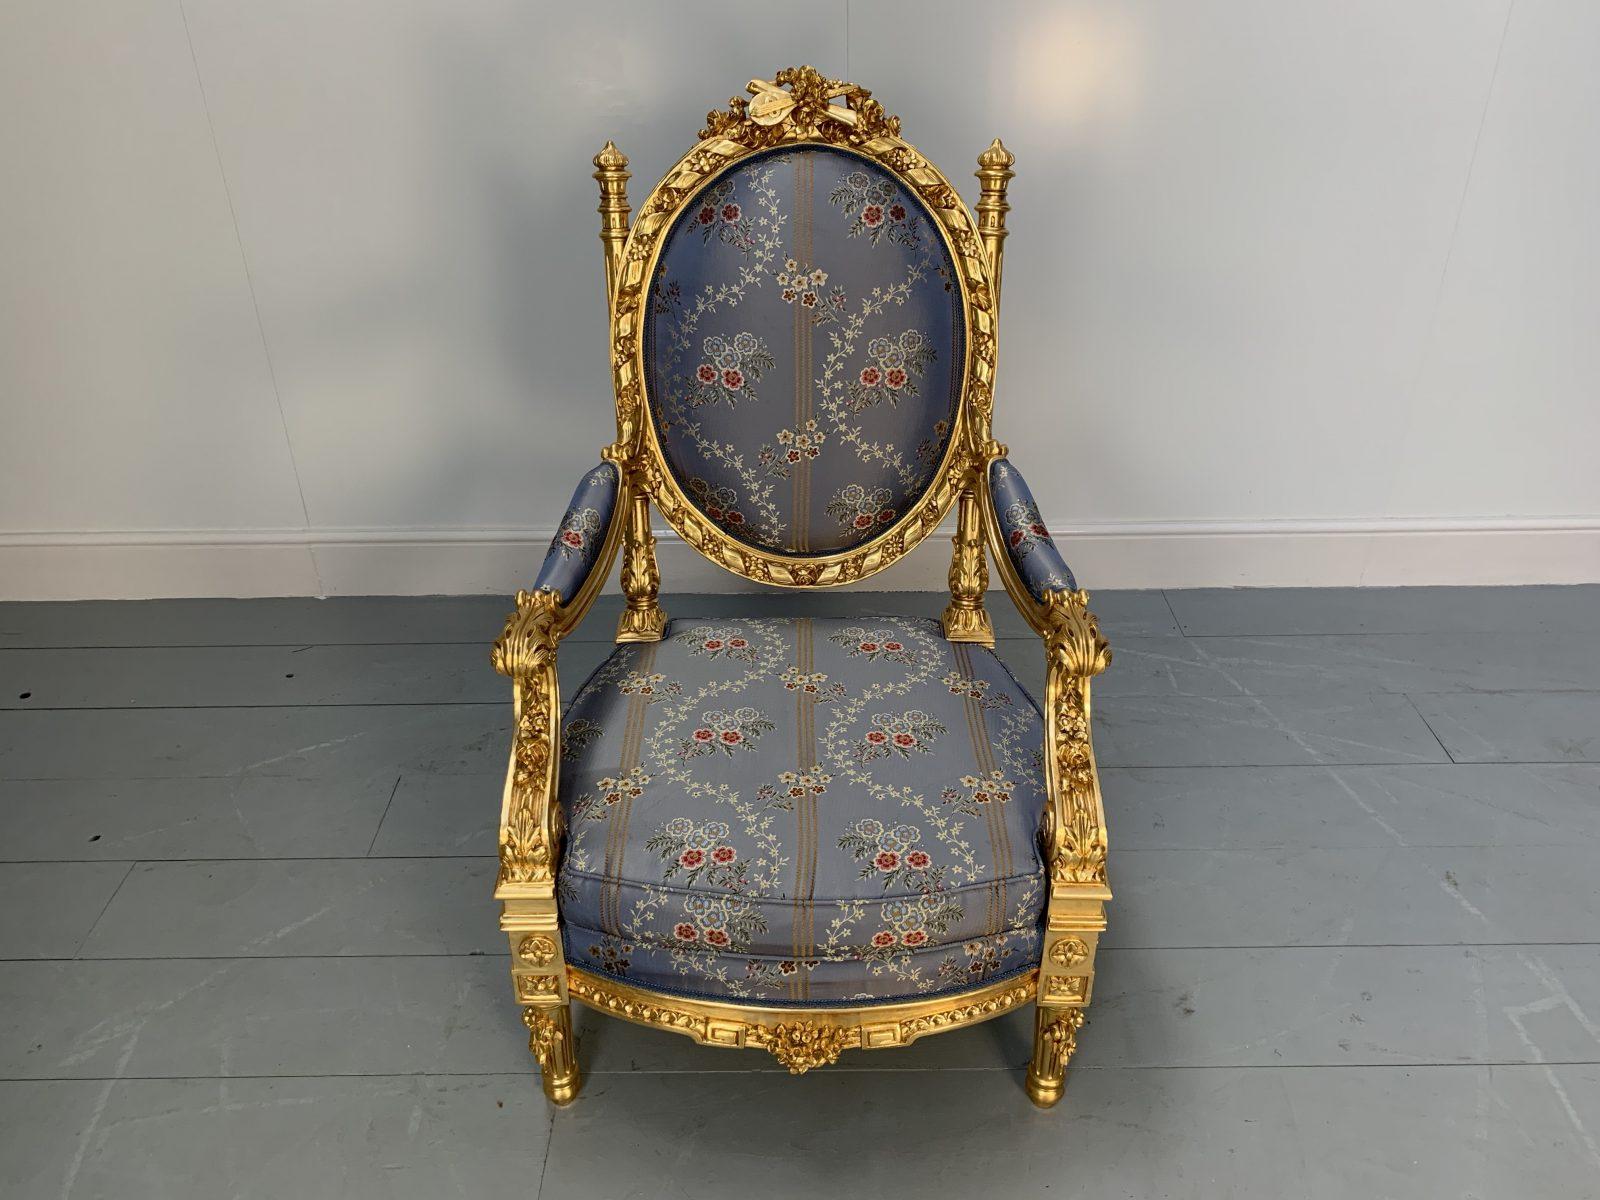 Contemporary Asnaghi Fauteuil Baroque Rococo Armchair in Floral Silk and Gilt For Sale